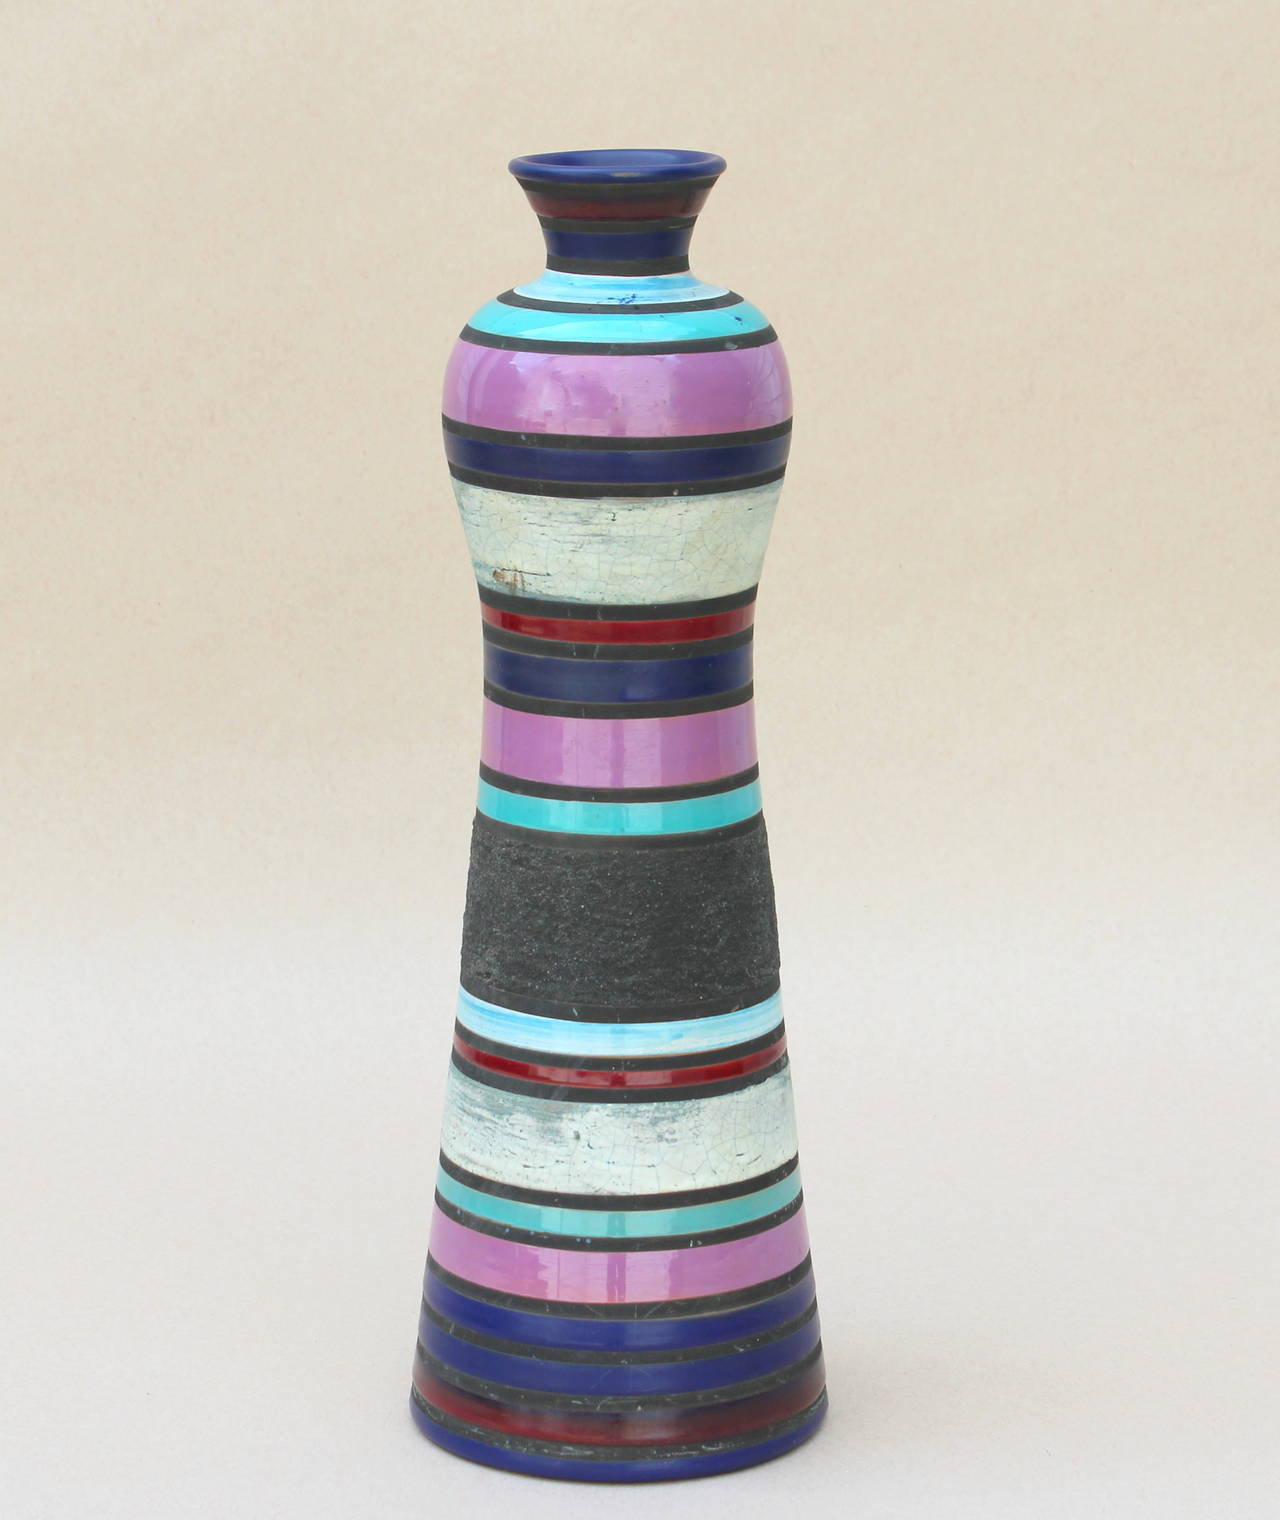 Early Bitossi vase designed by Ettore Sottsass, circa late 1950s. Of tall bottle form with bands of colored glaze in matte and gloss finishes. Retains original Raymor label with Bitossi code. Measures: 15